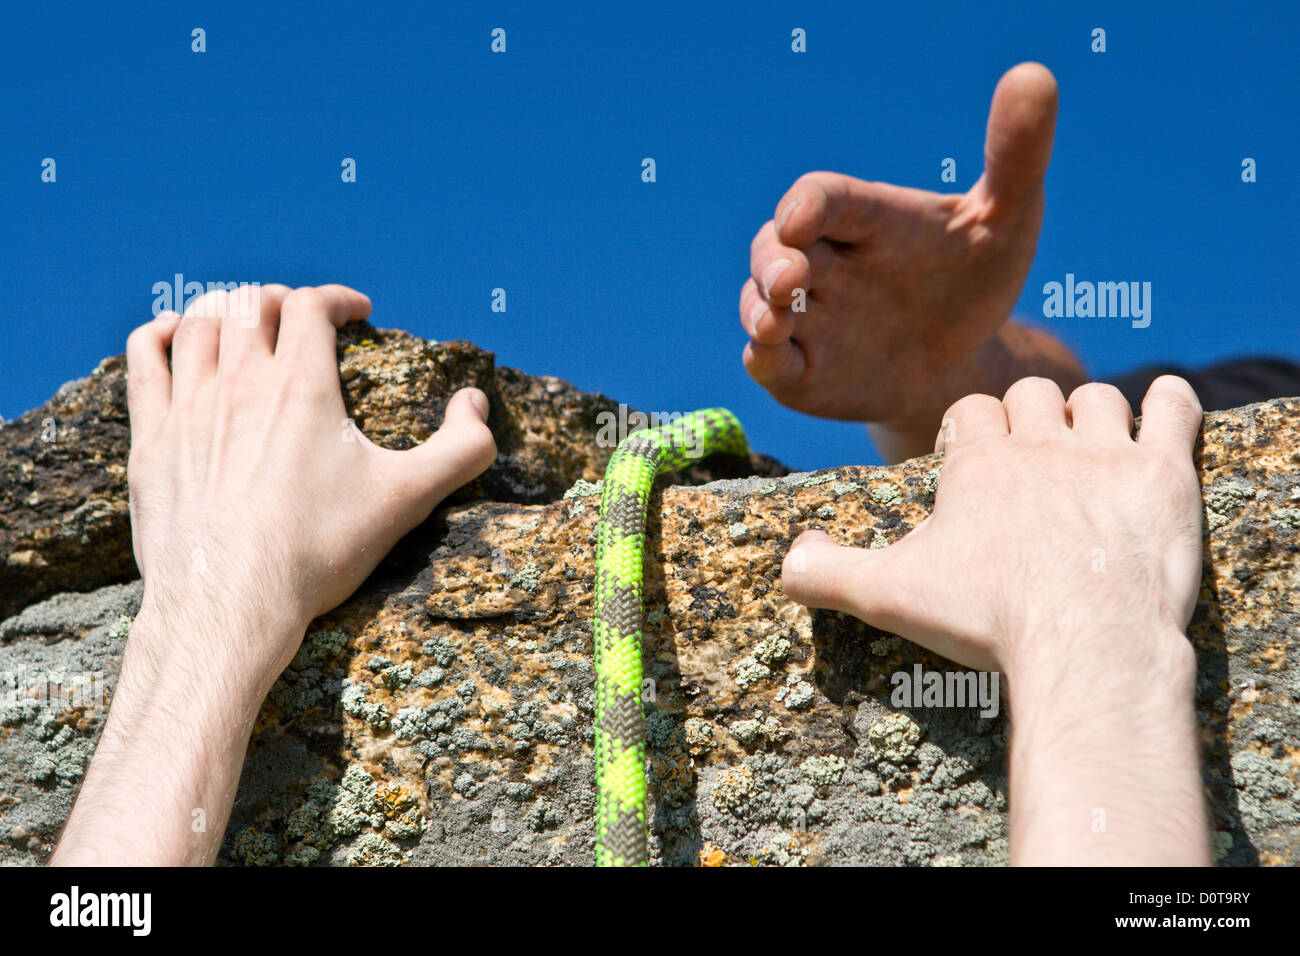 Rock climber reaching for helping-hand partner. Stock Photo